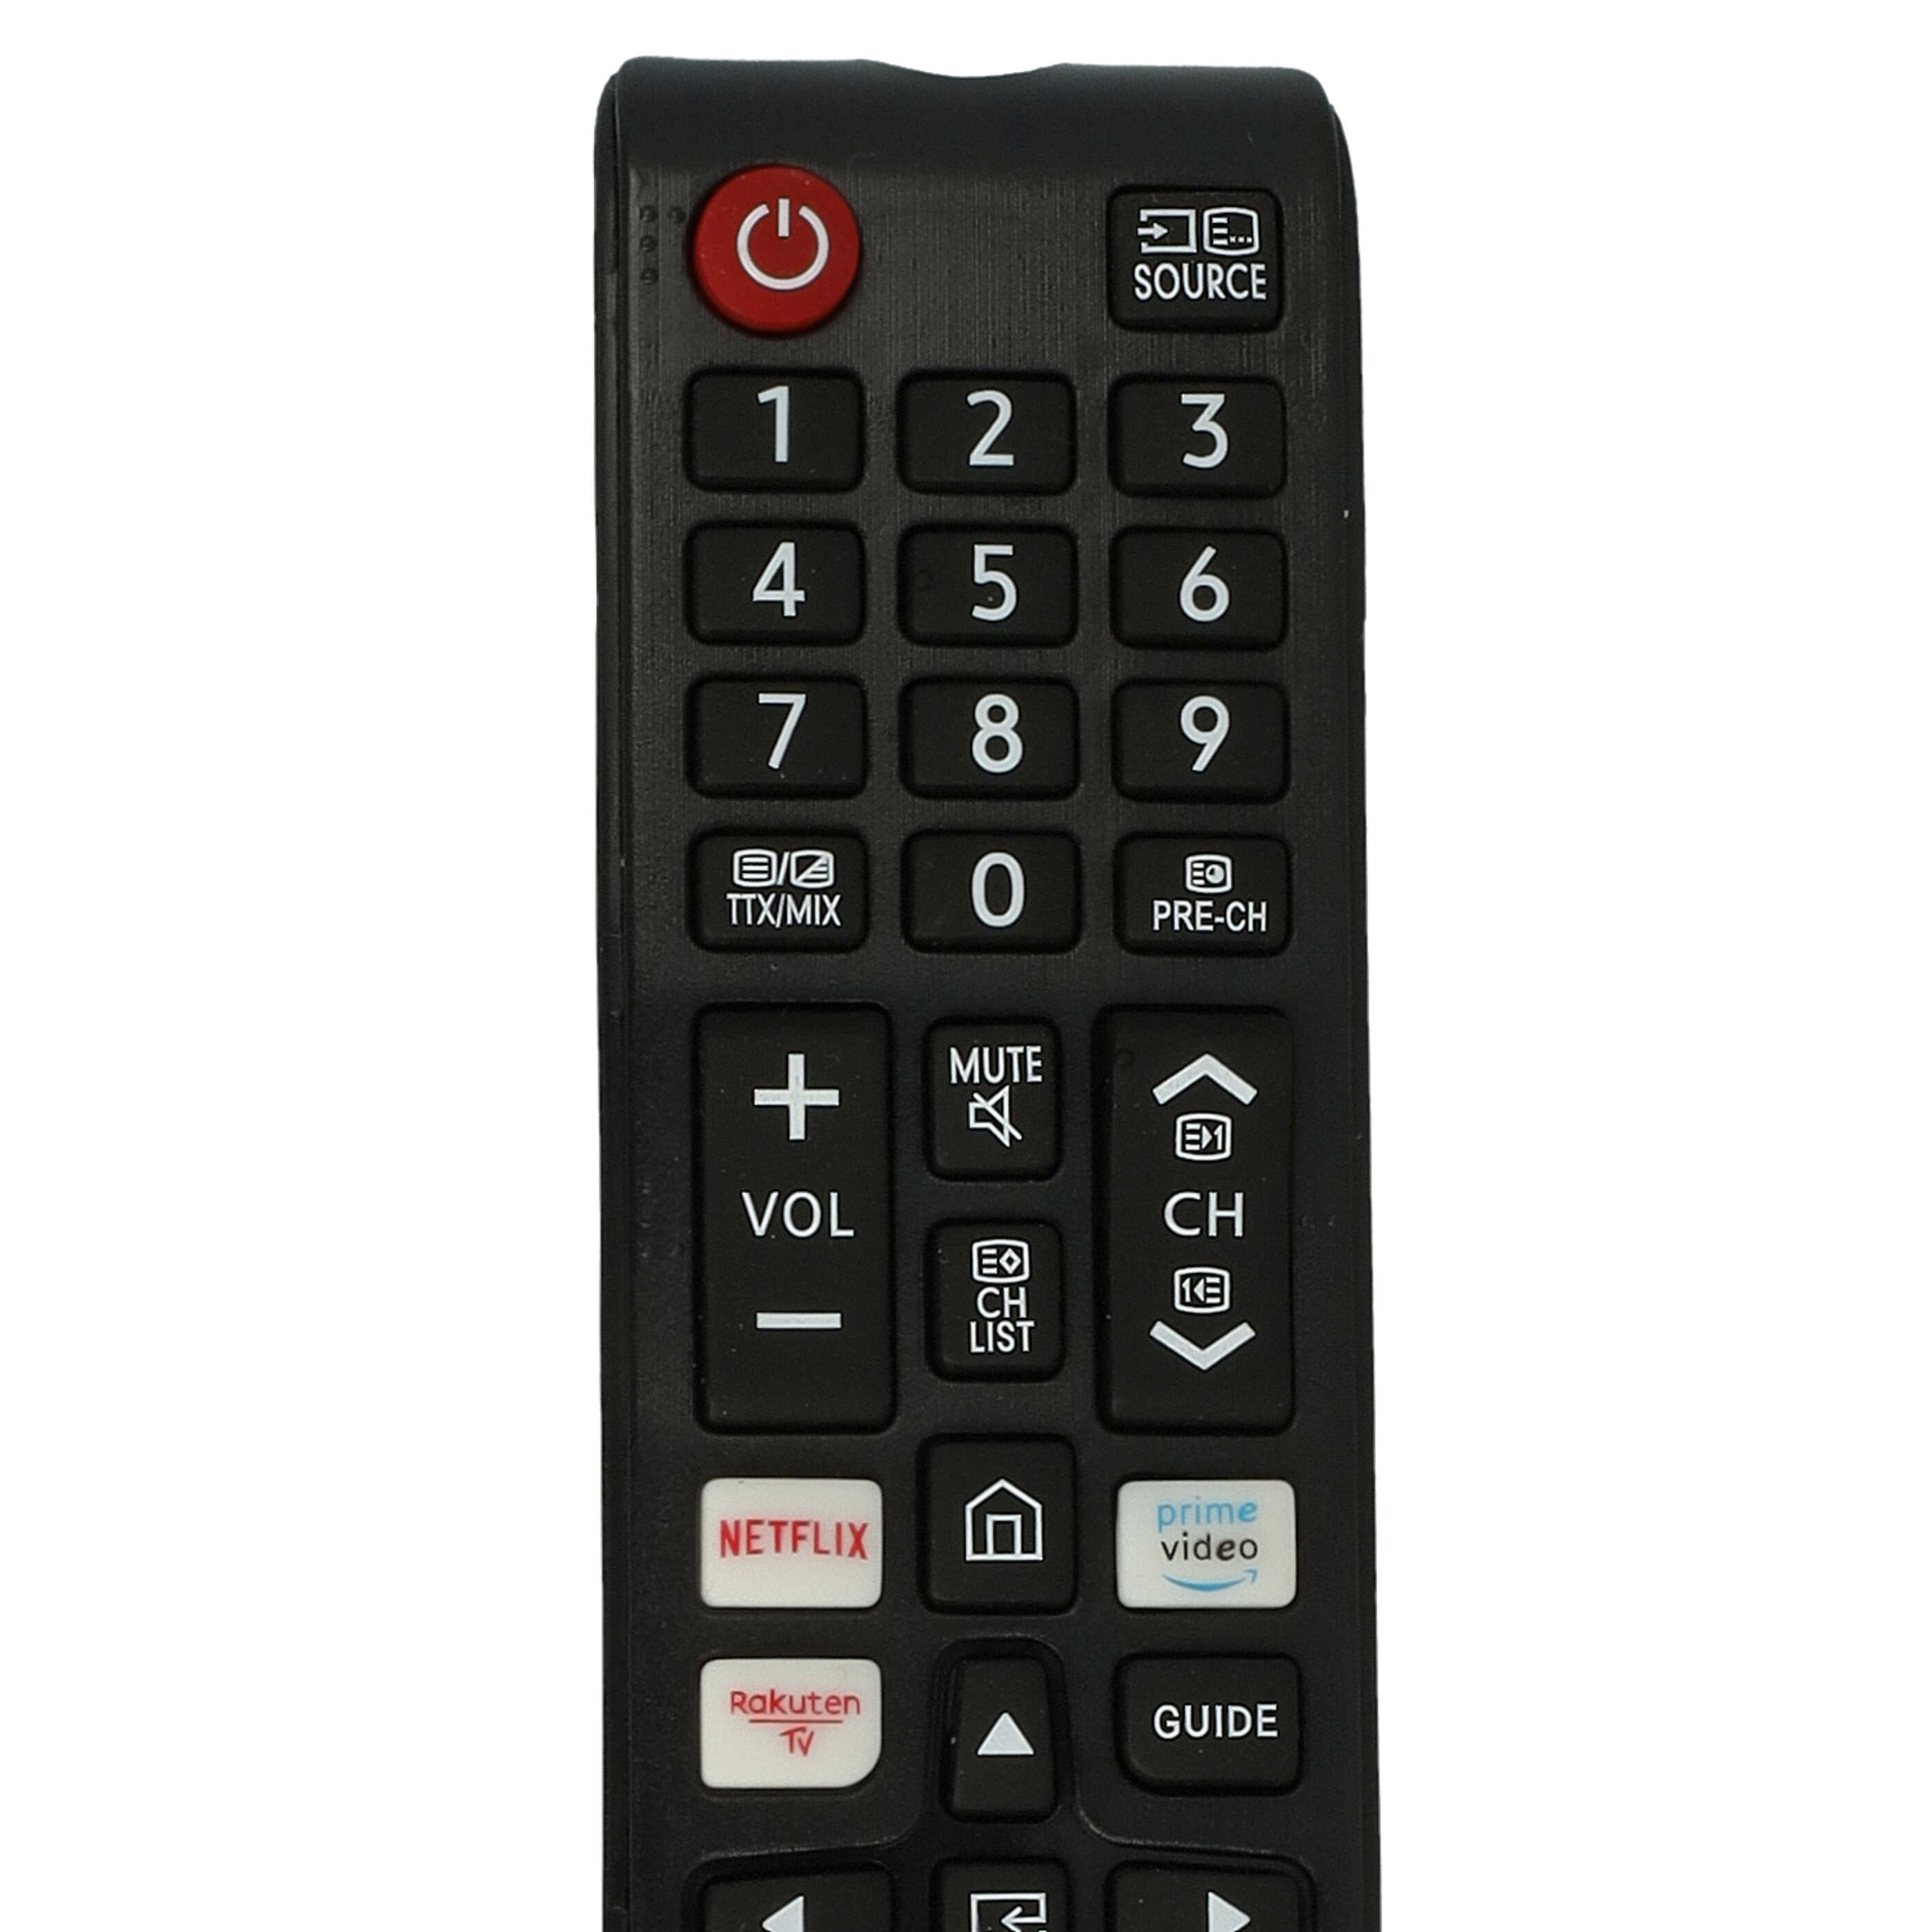 Remote Control replaces Samsung BN59-01315B for Samsung TV